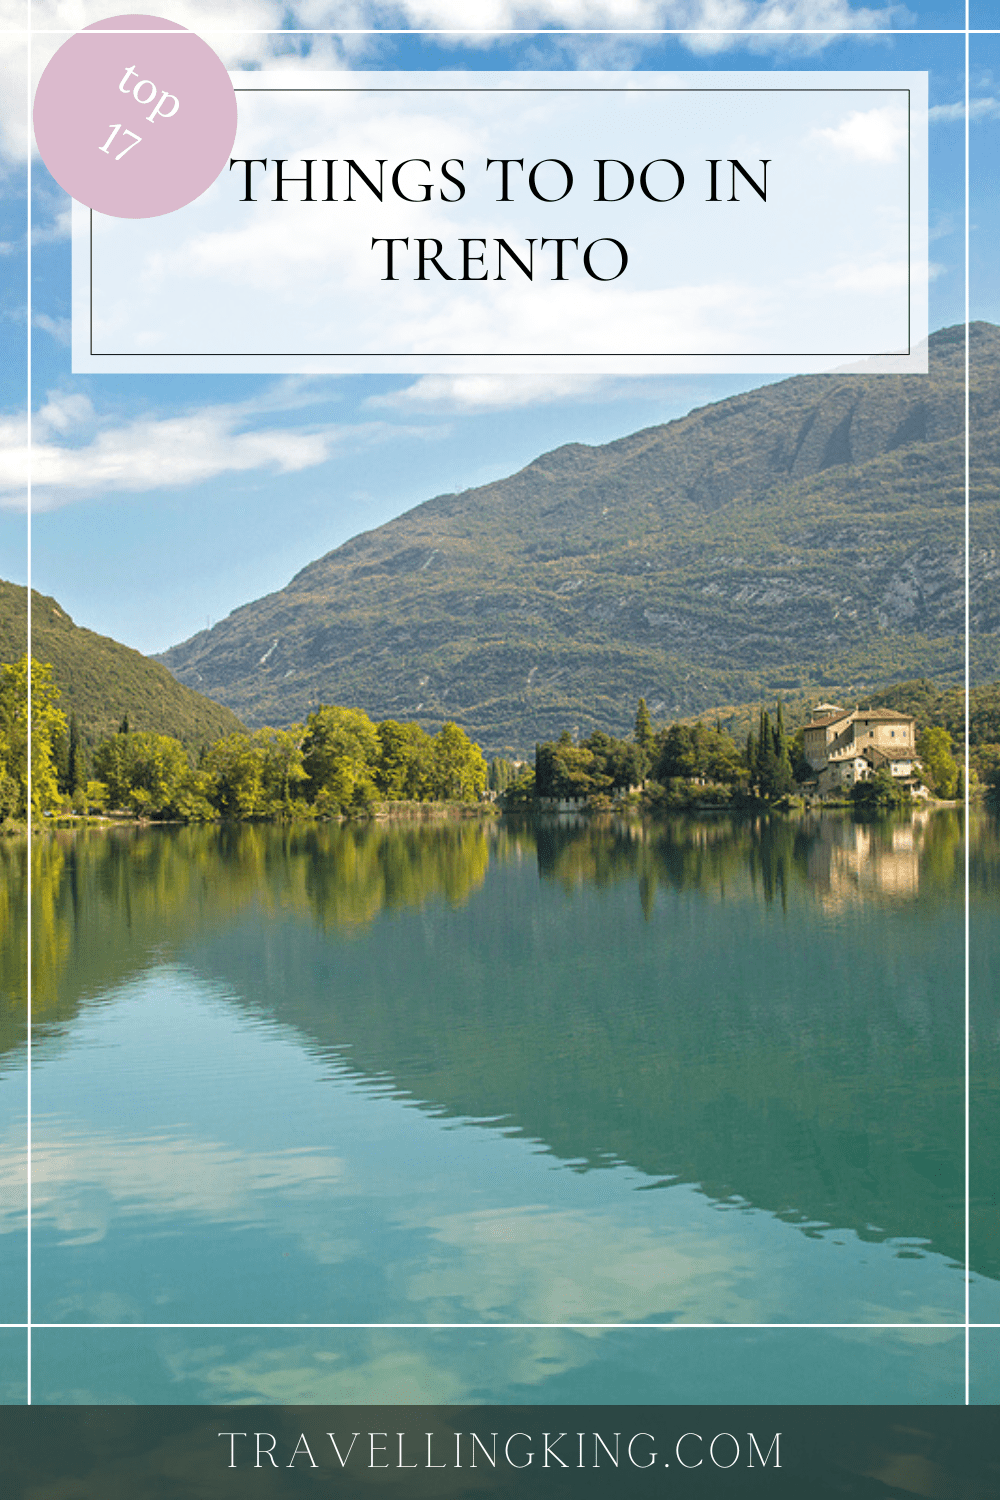 17 Things To Do in Trento